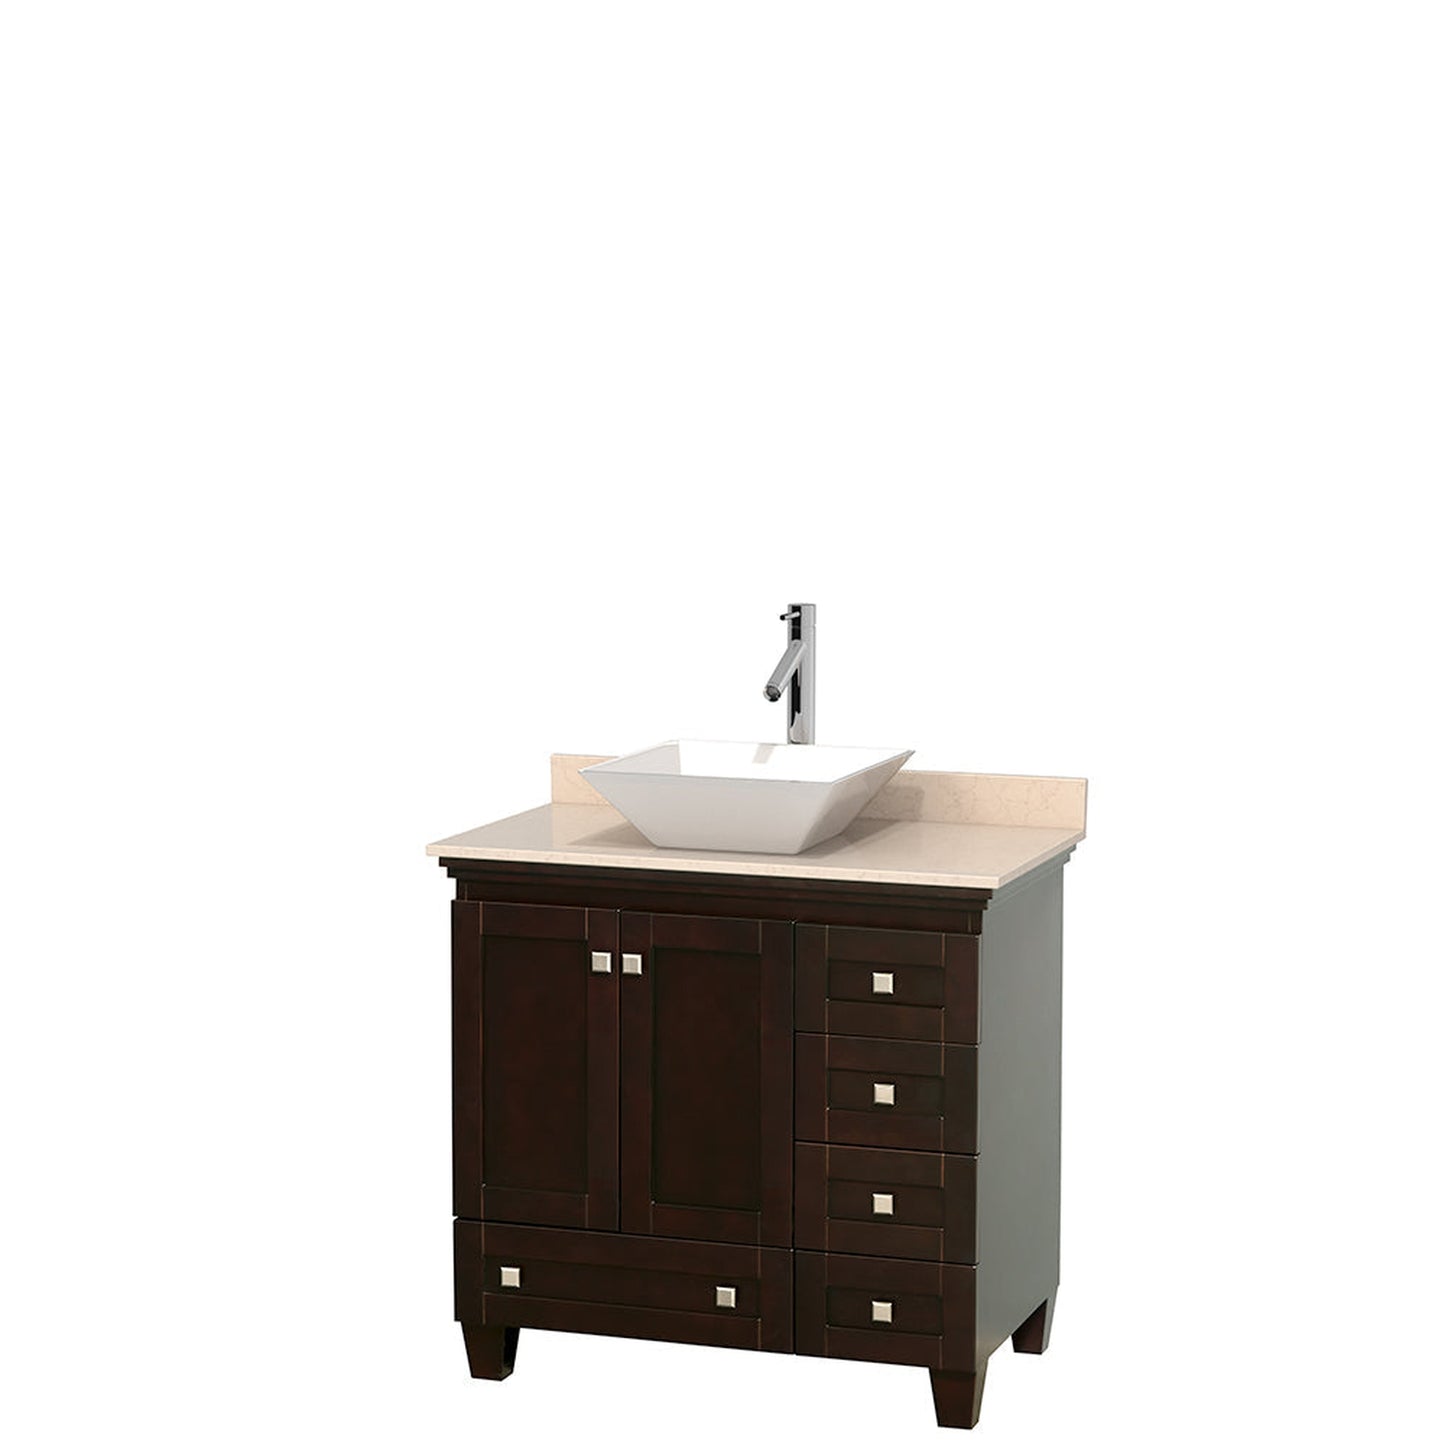 Wyndham Collection Acclaim 36" Single Bathroom Vanity in Espresso With Ivory Marble Countertop & Pyra White Porcelain Sink